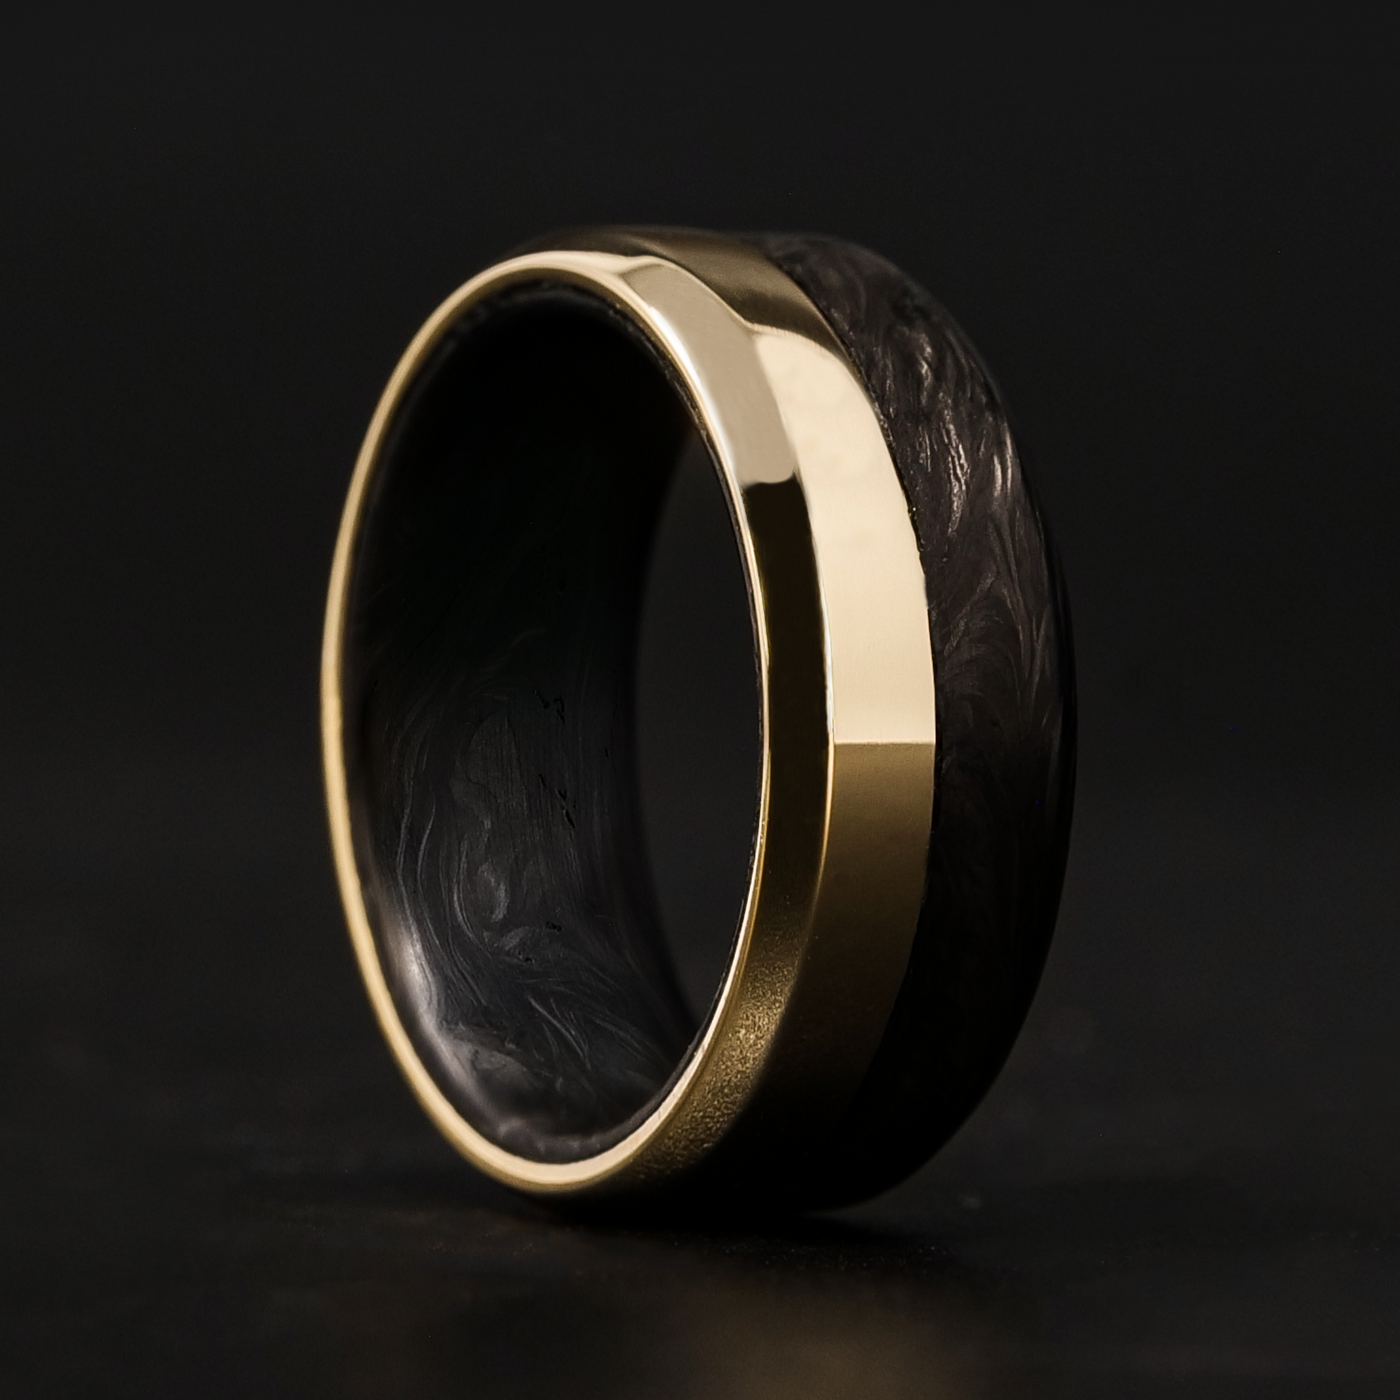 Gold and Forged Carbon Fiber Ring | Forged Carbon Fiber Liner | Handcrafted in The USA